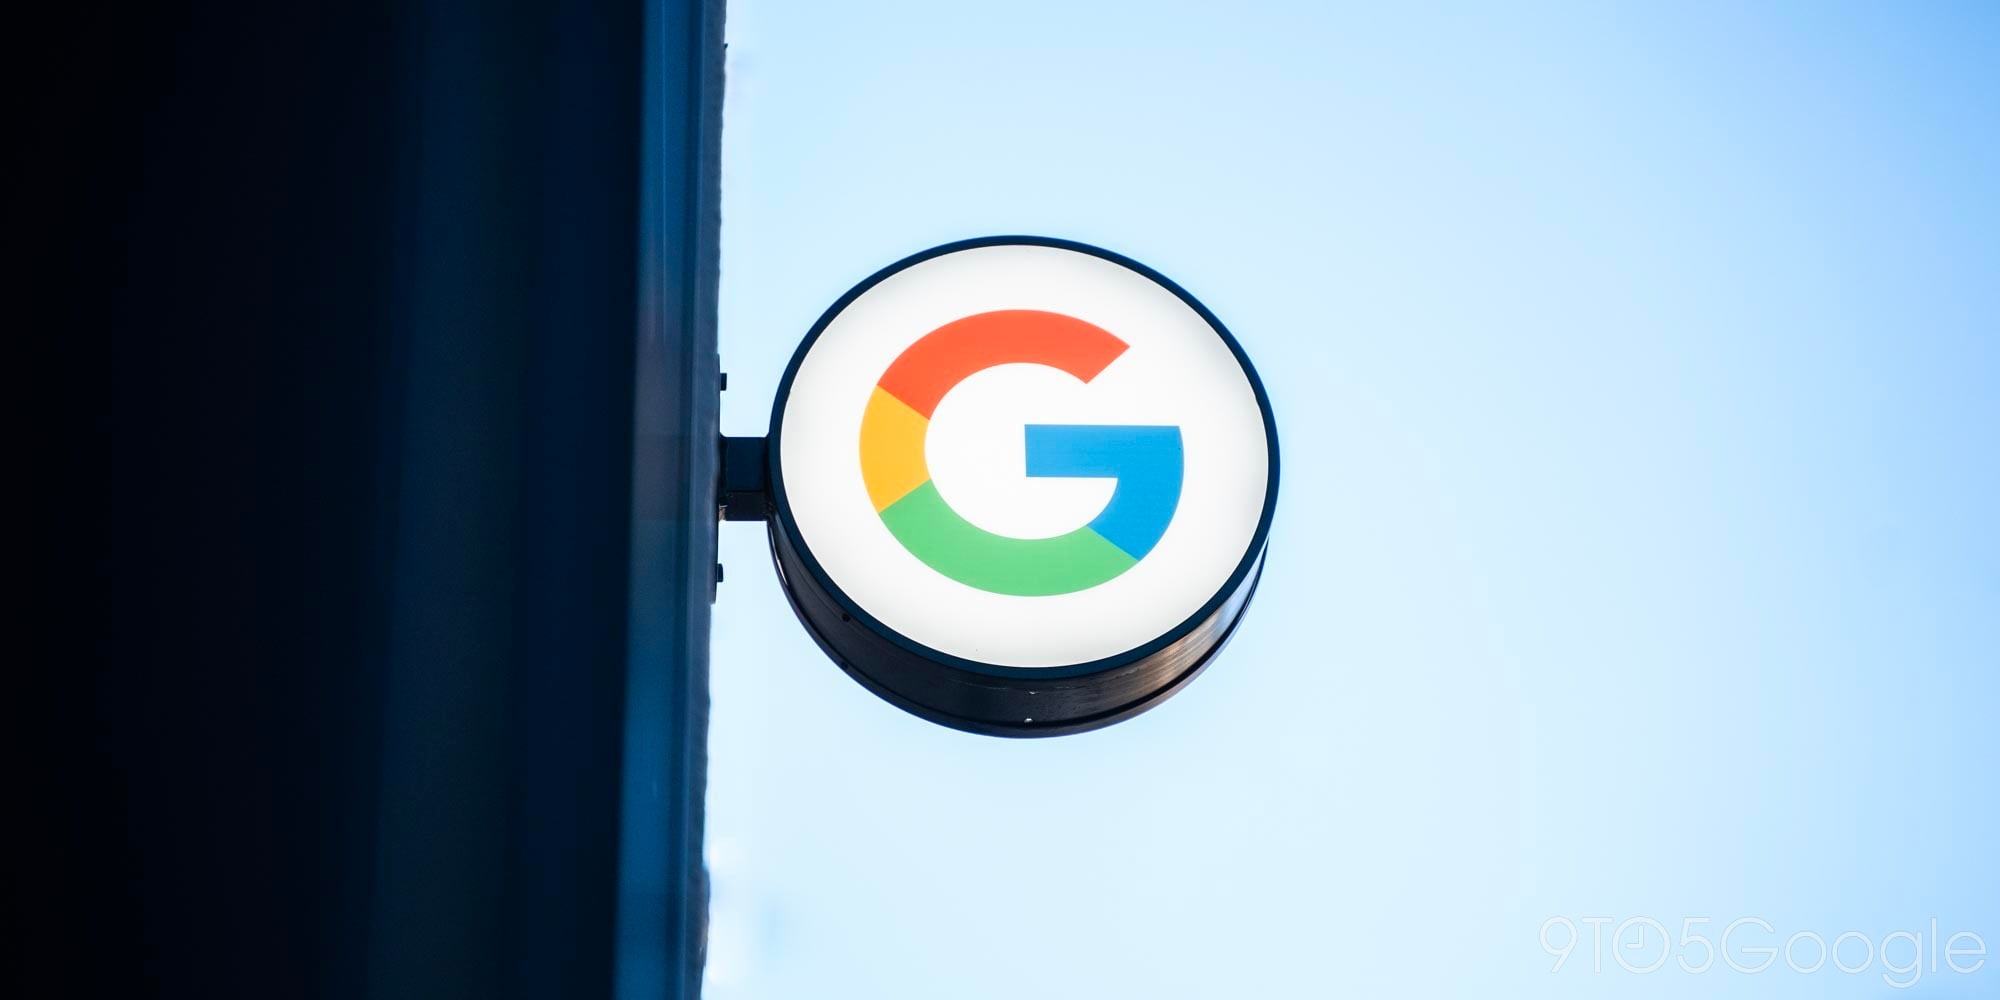 Google planning three new offices in Canada - 9to5Google